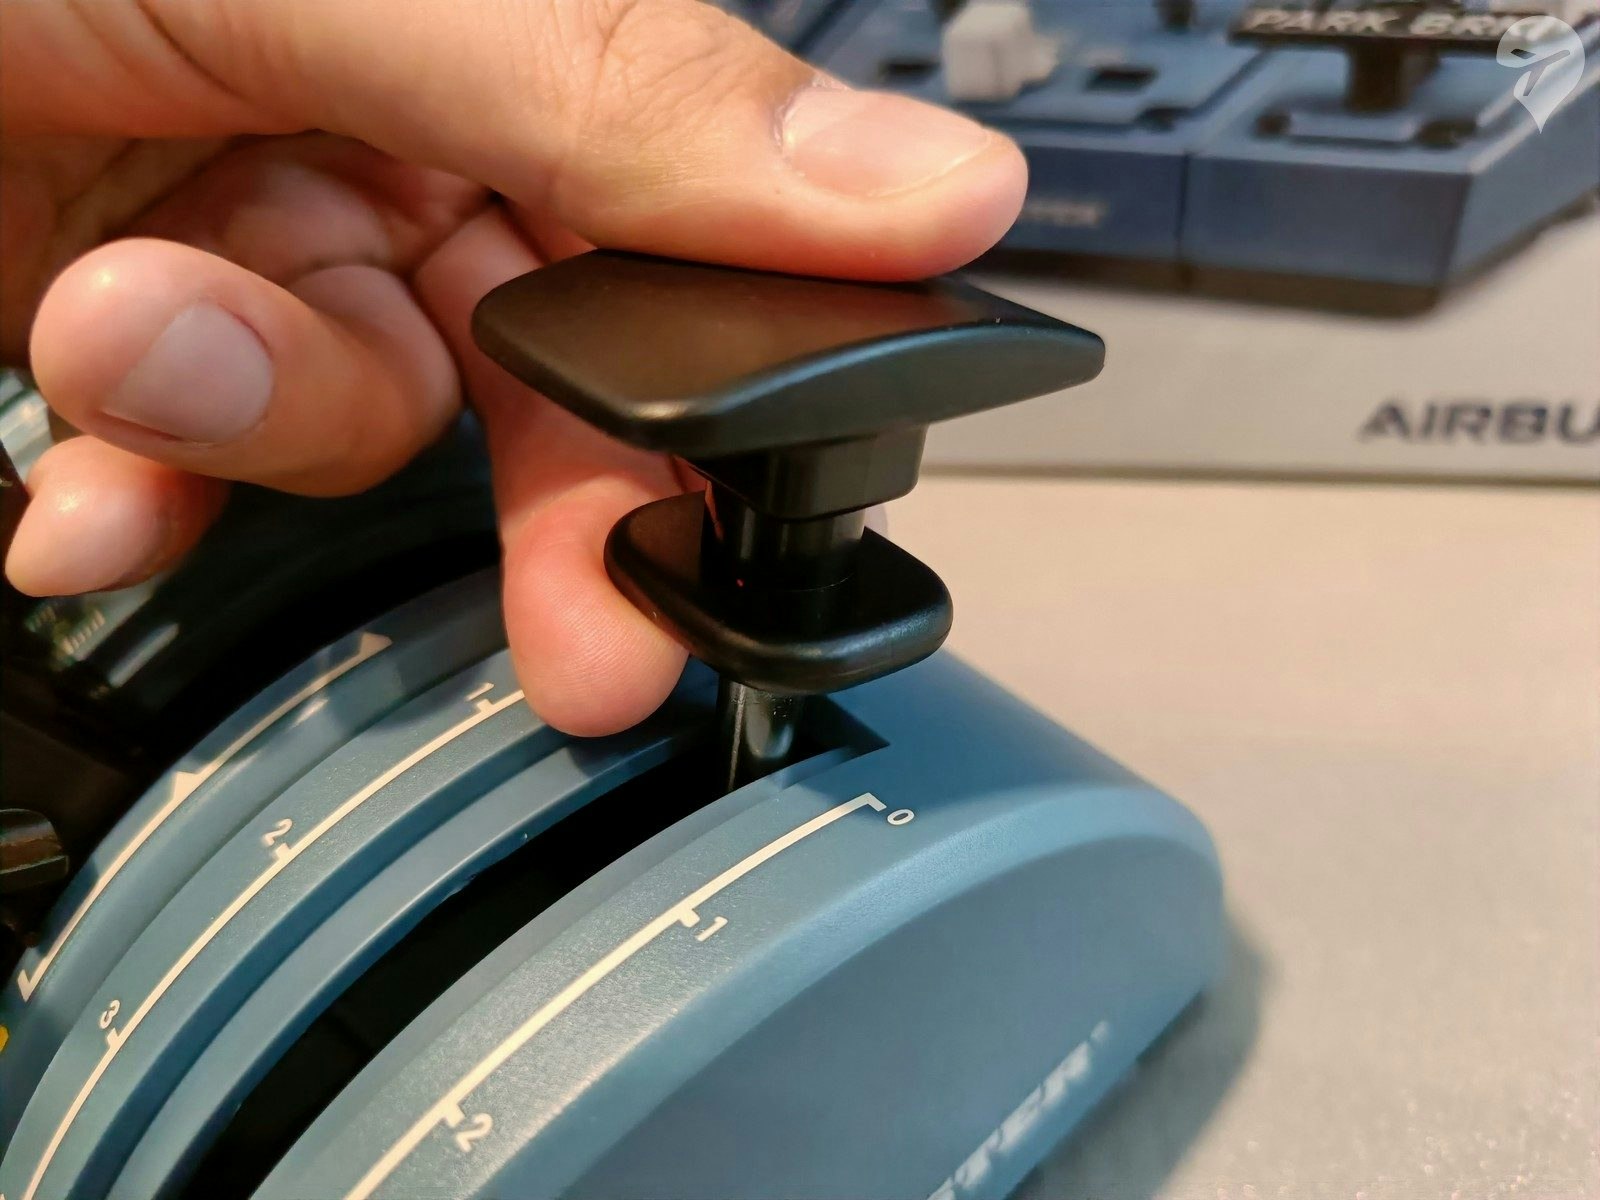 Thrustmaster Airbus TCA Review - UFP - The United Federation of Planets